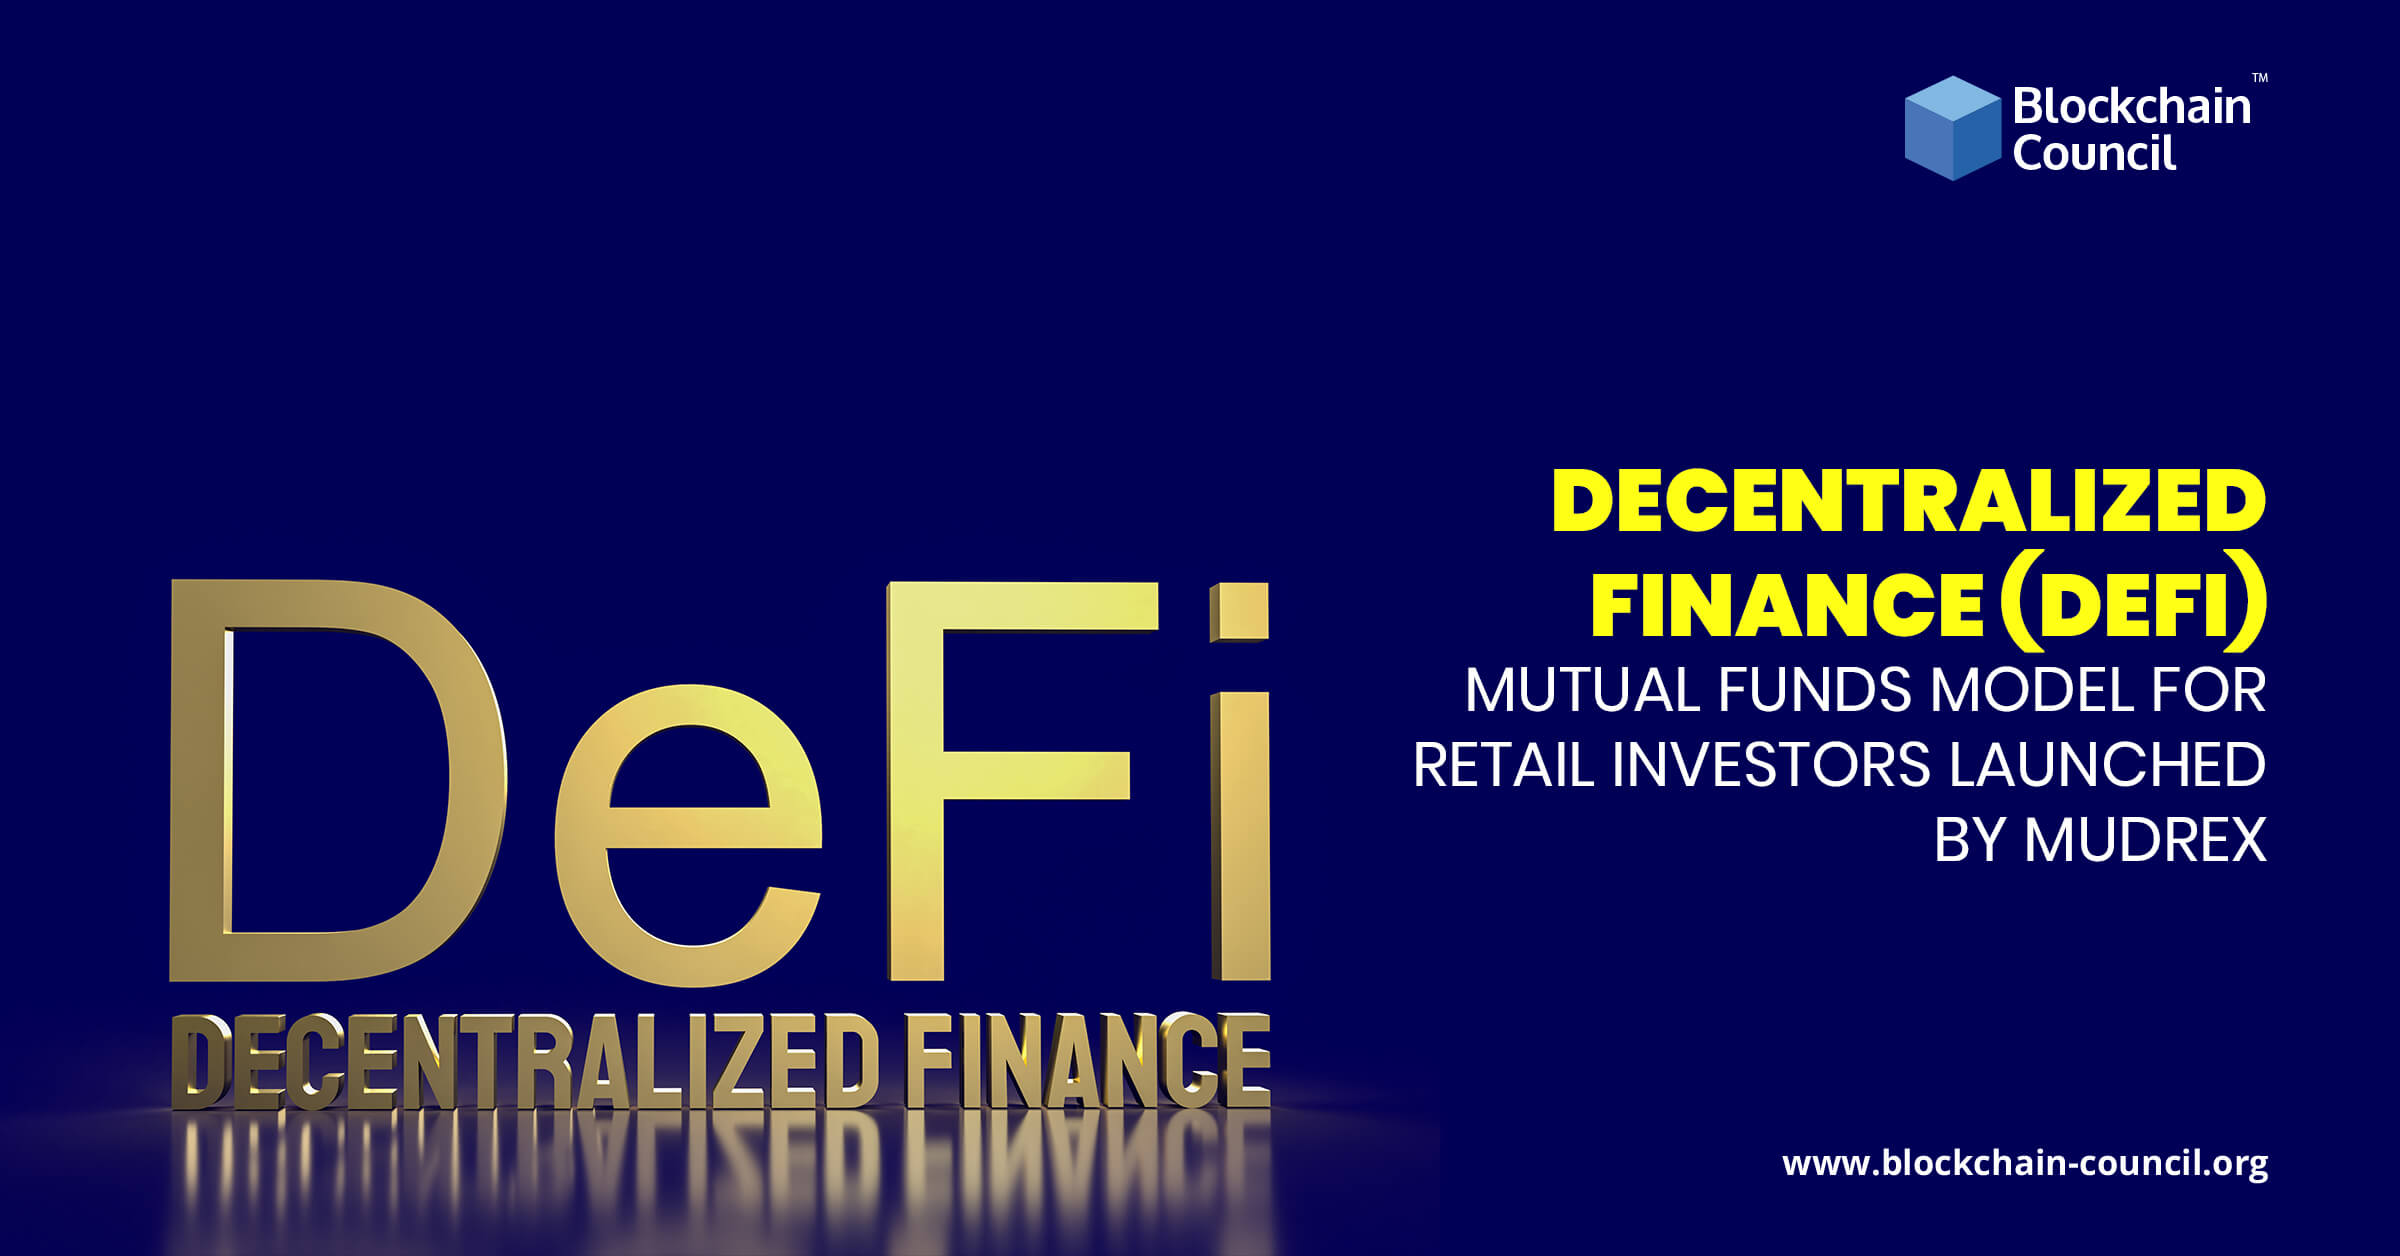 Decentralized Finance (DeFi) mutual funds model for retail investors launched by Mudrex new